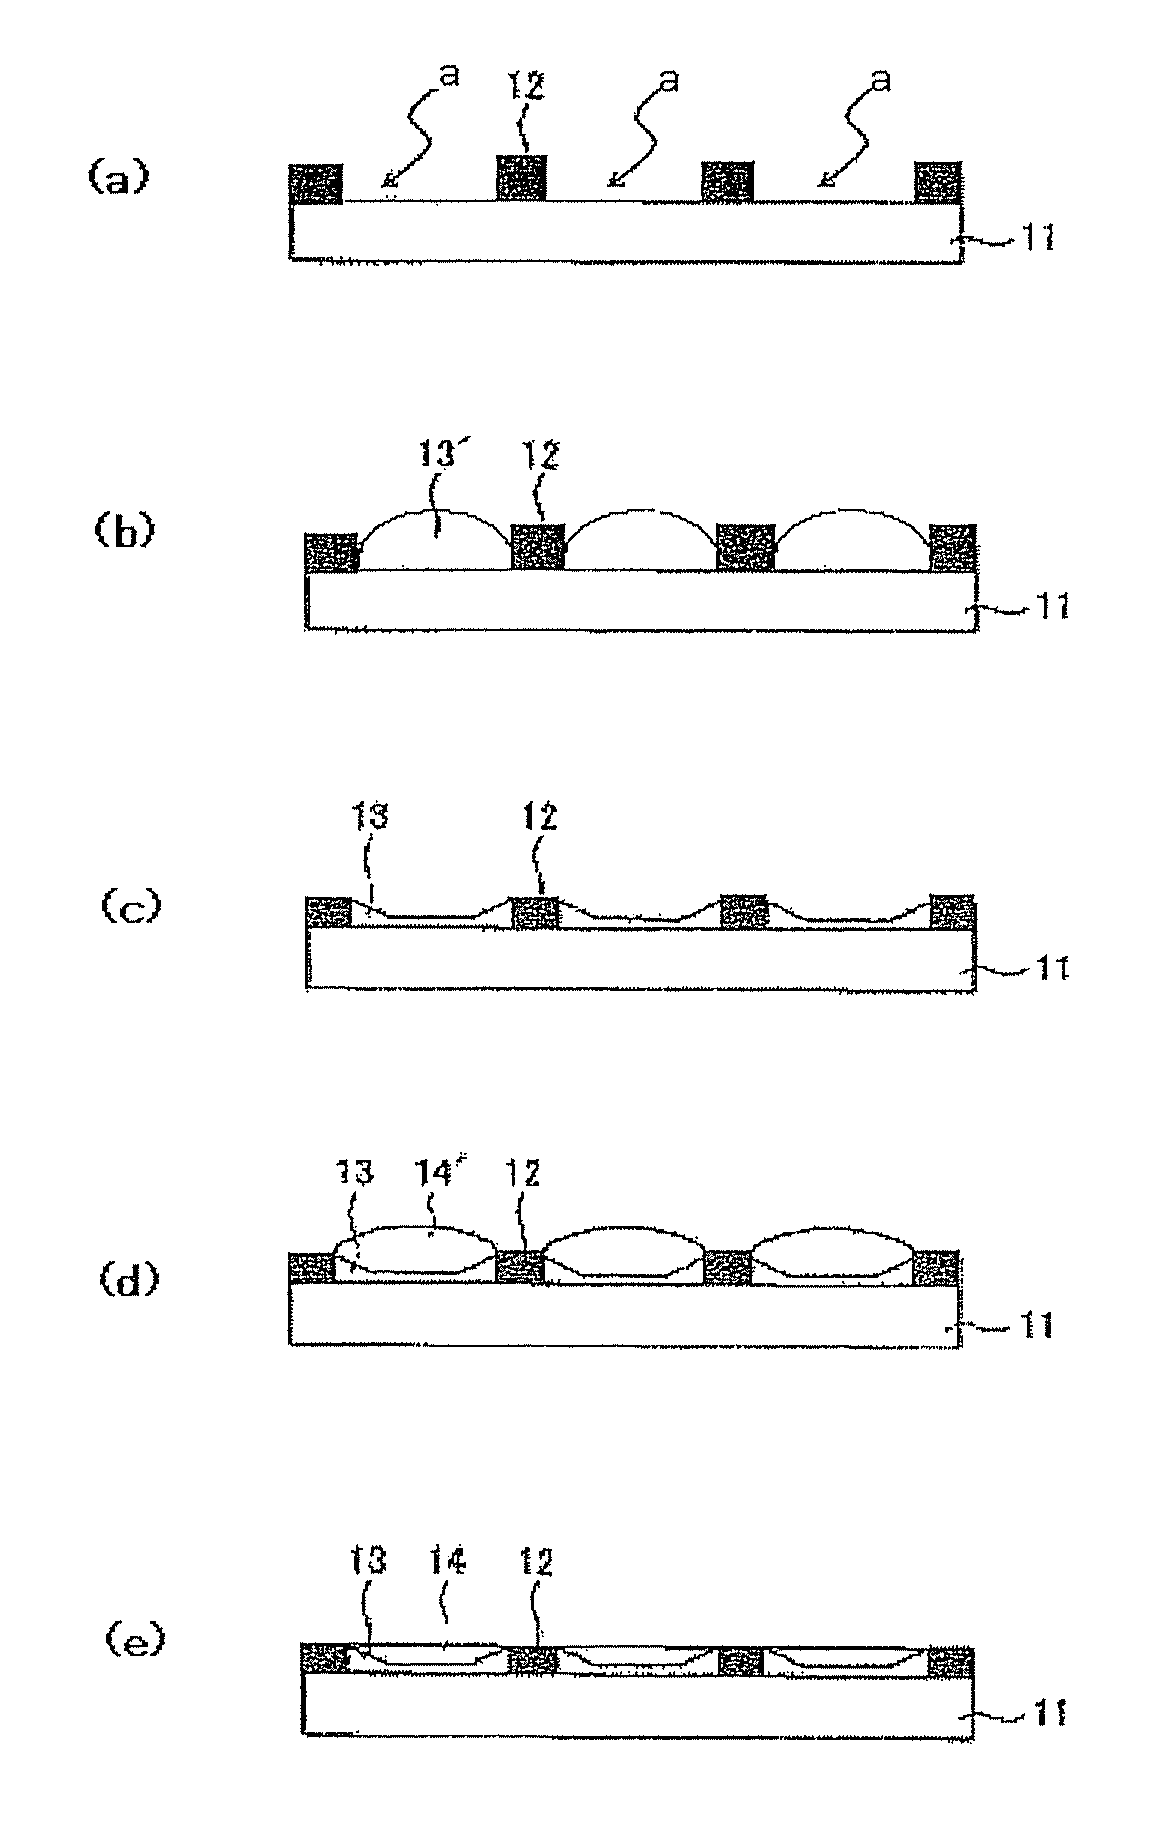 Liquid crystal display device and color film plate, and processes for producing the same